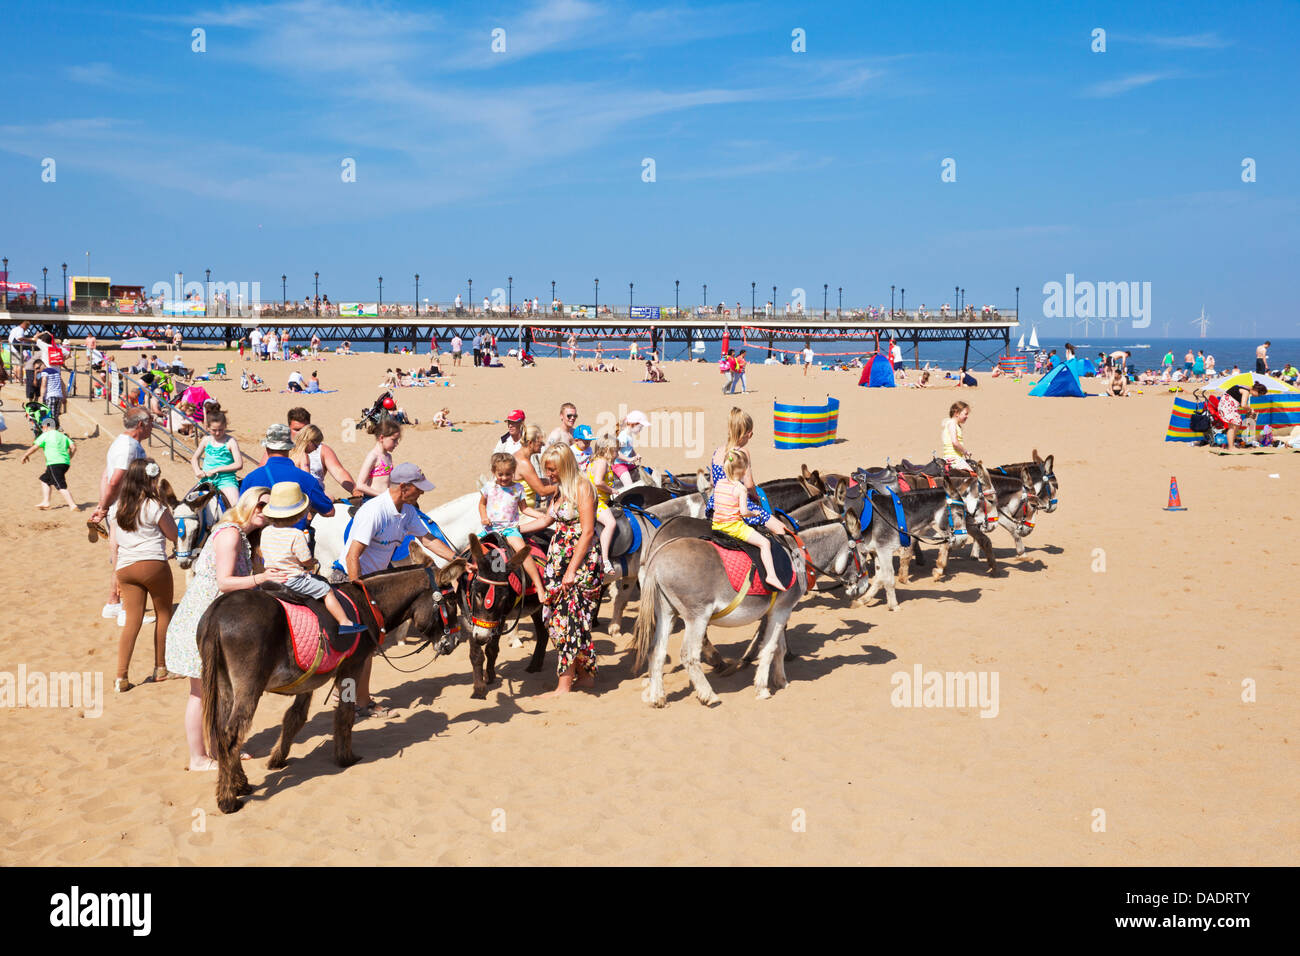 Donkeys on Beach with Pier Skegness Lincolnshire england UK GB Europe Stock Photo